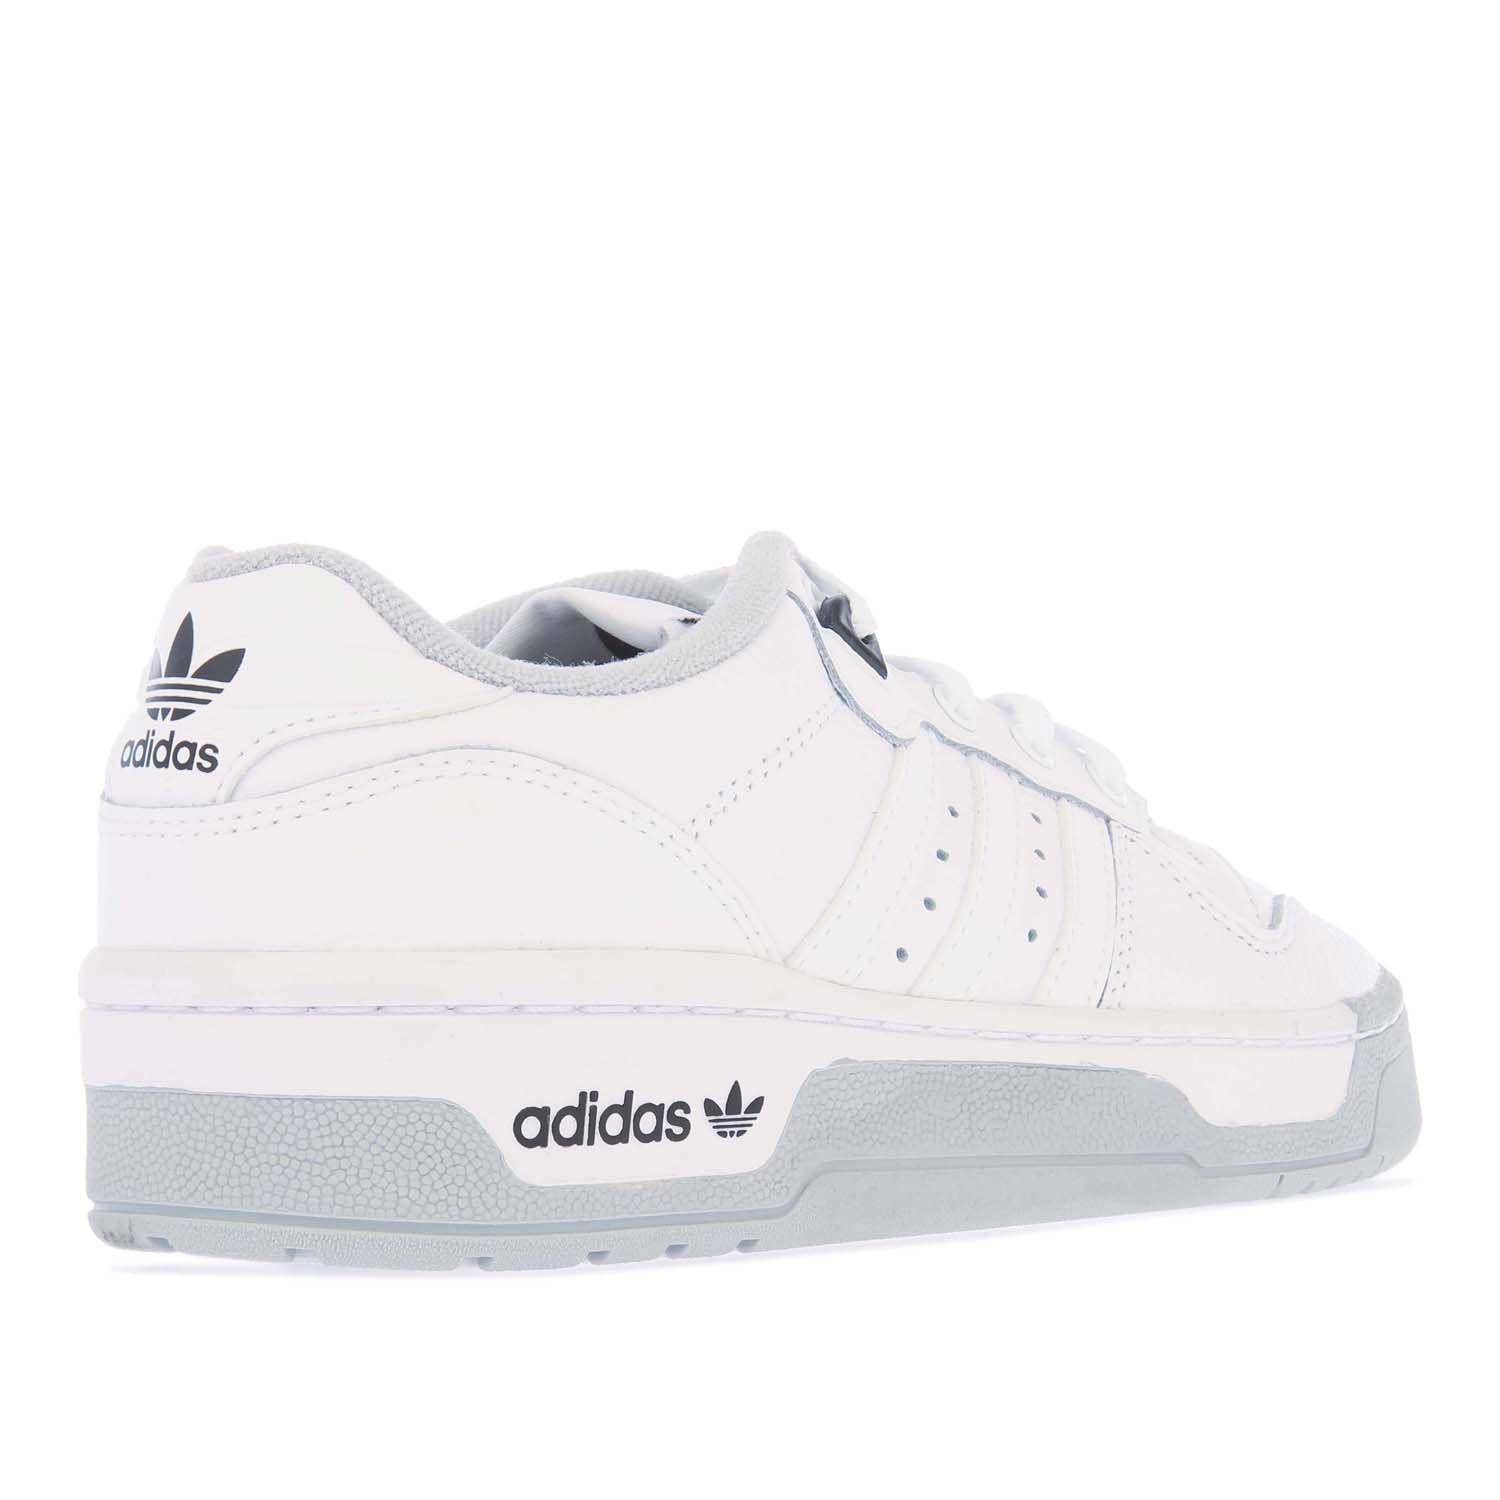 Womens adidas Rivalry Low Premium Trainers in white grey.- Leather upper. - Lace fastening.- Exposed foam tongue.- Terry towel lining.- Rubber outsole.- Leather upper  Textile lining.- Ref.: H04398